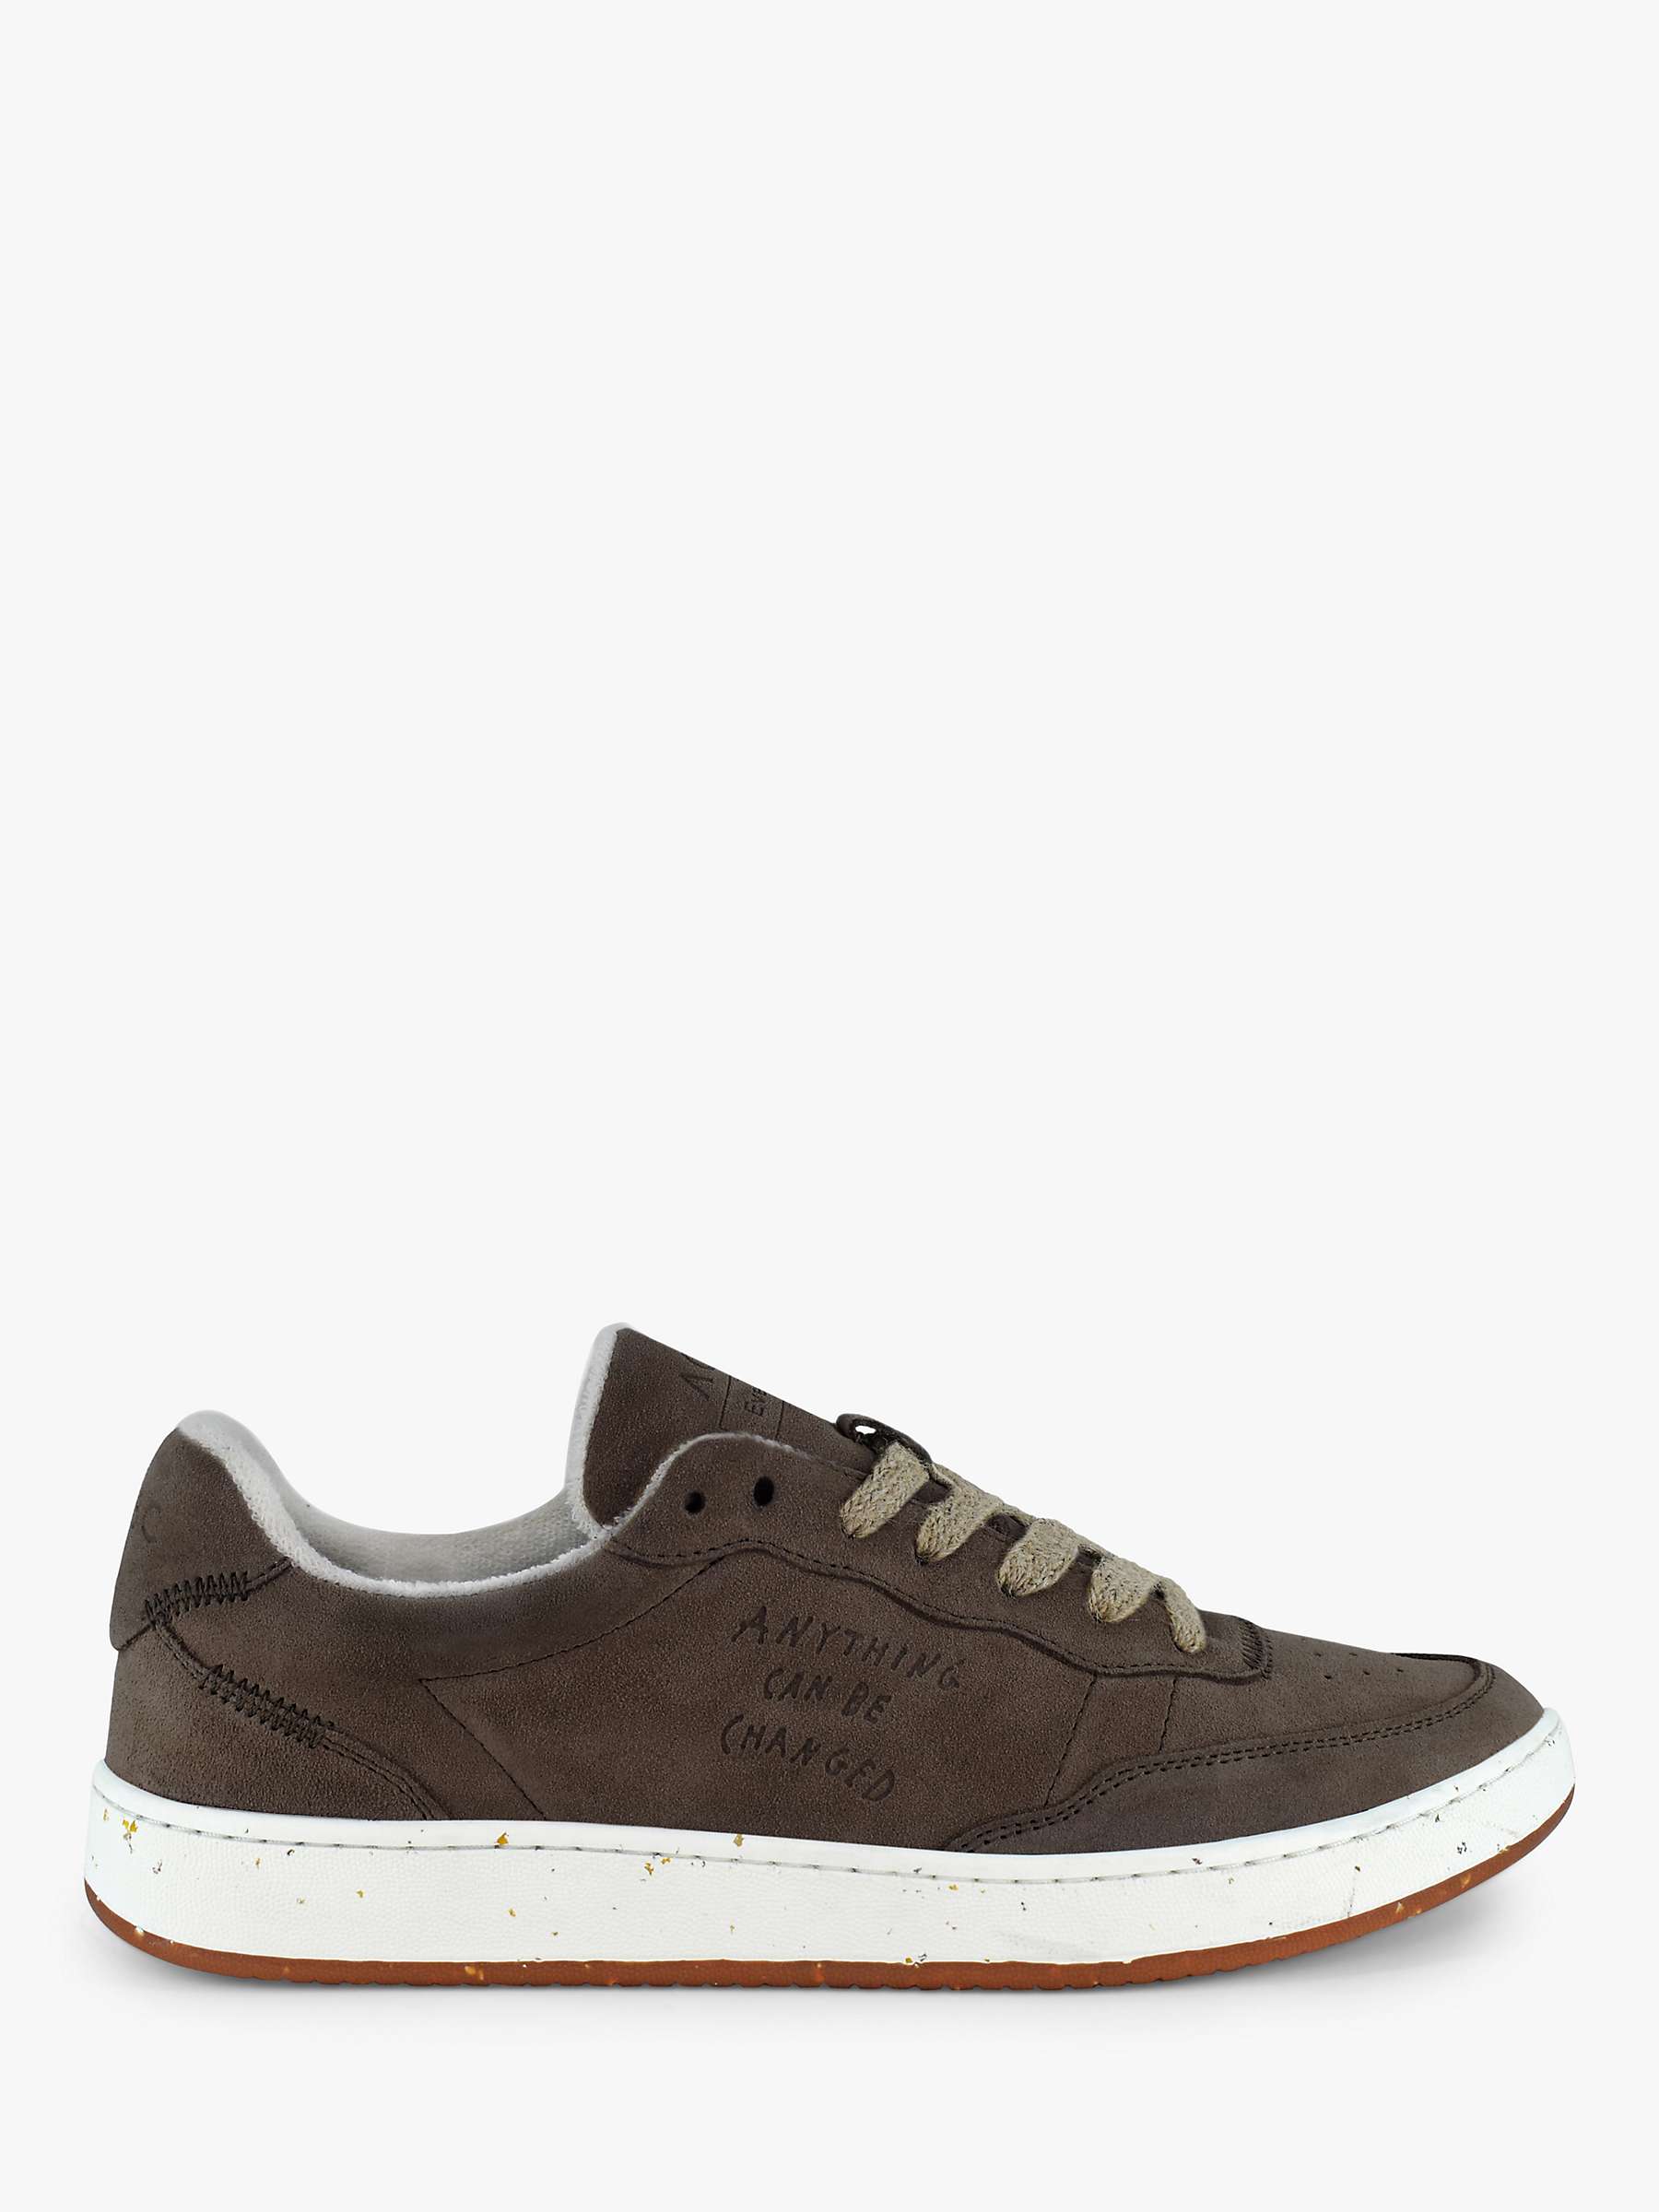 Buy ACBC Evergreen Suede Trainer Online at johnlewis.com